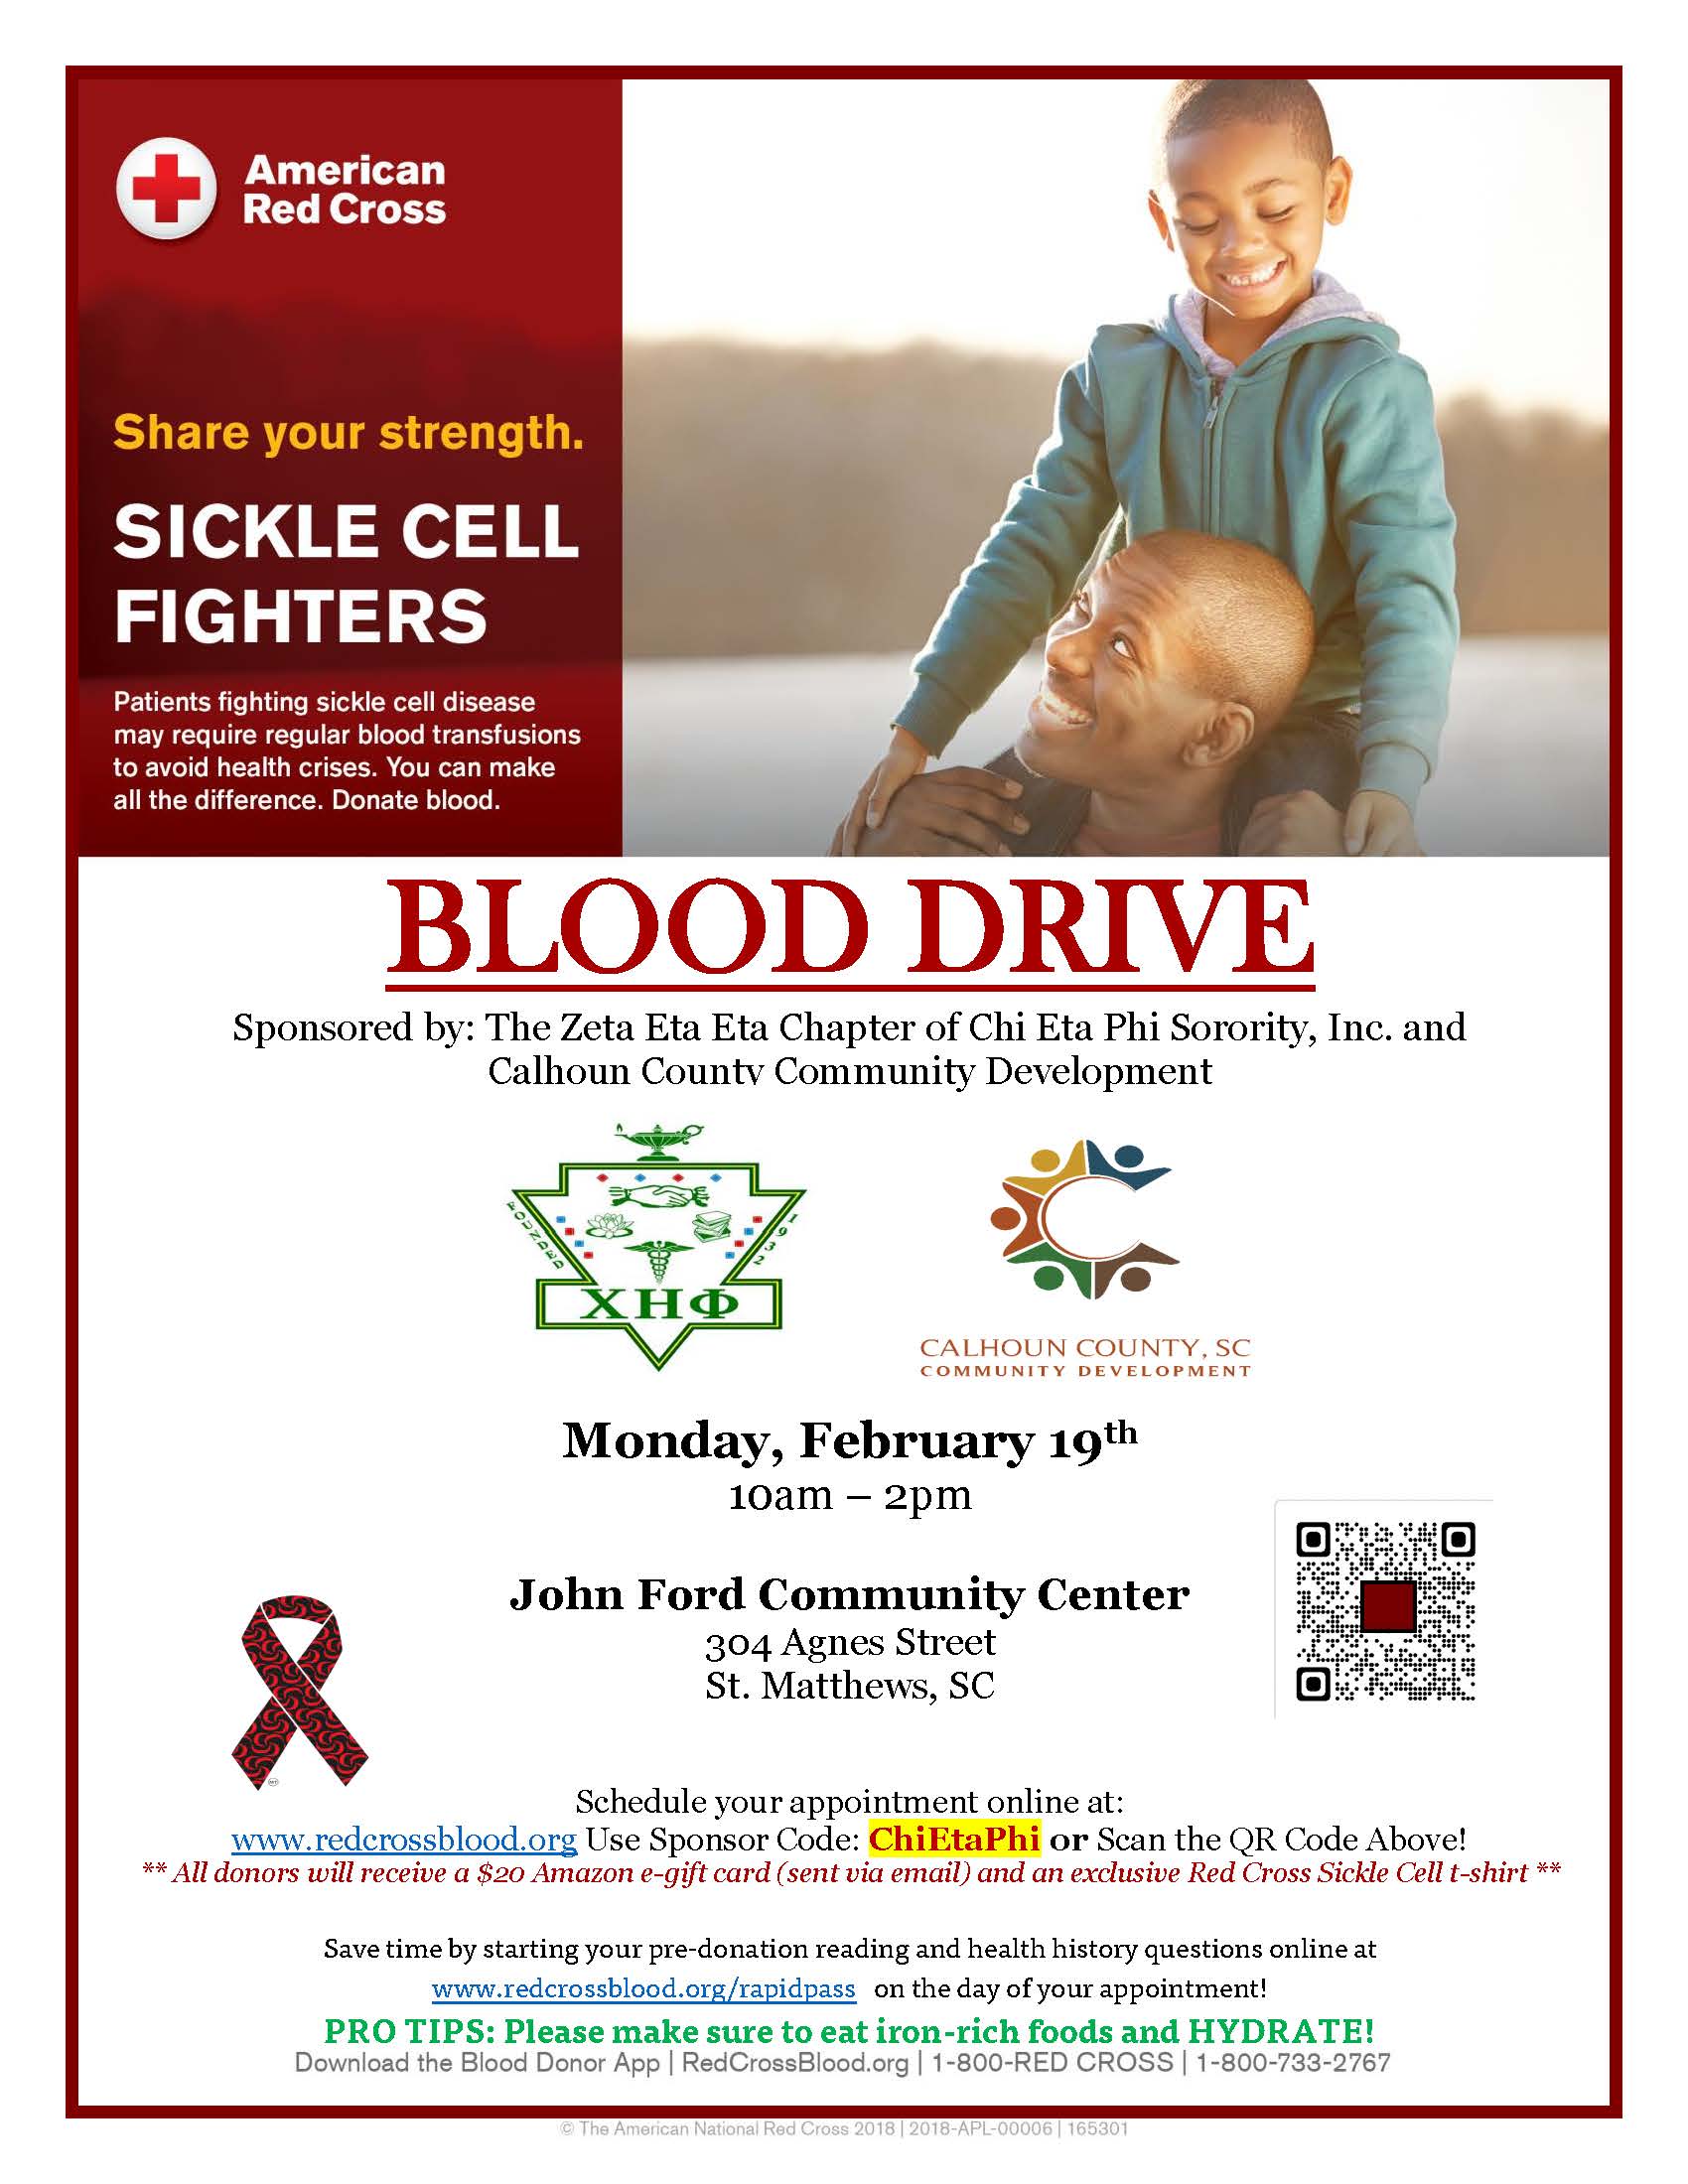 Blood Drive to be Held at John Ford Community Center